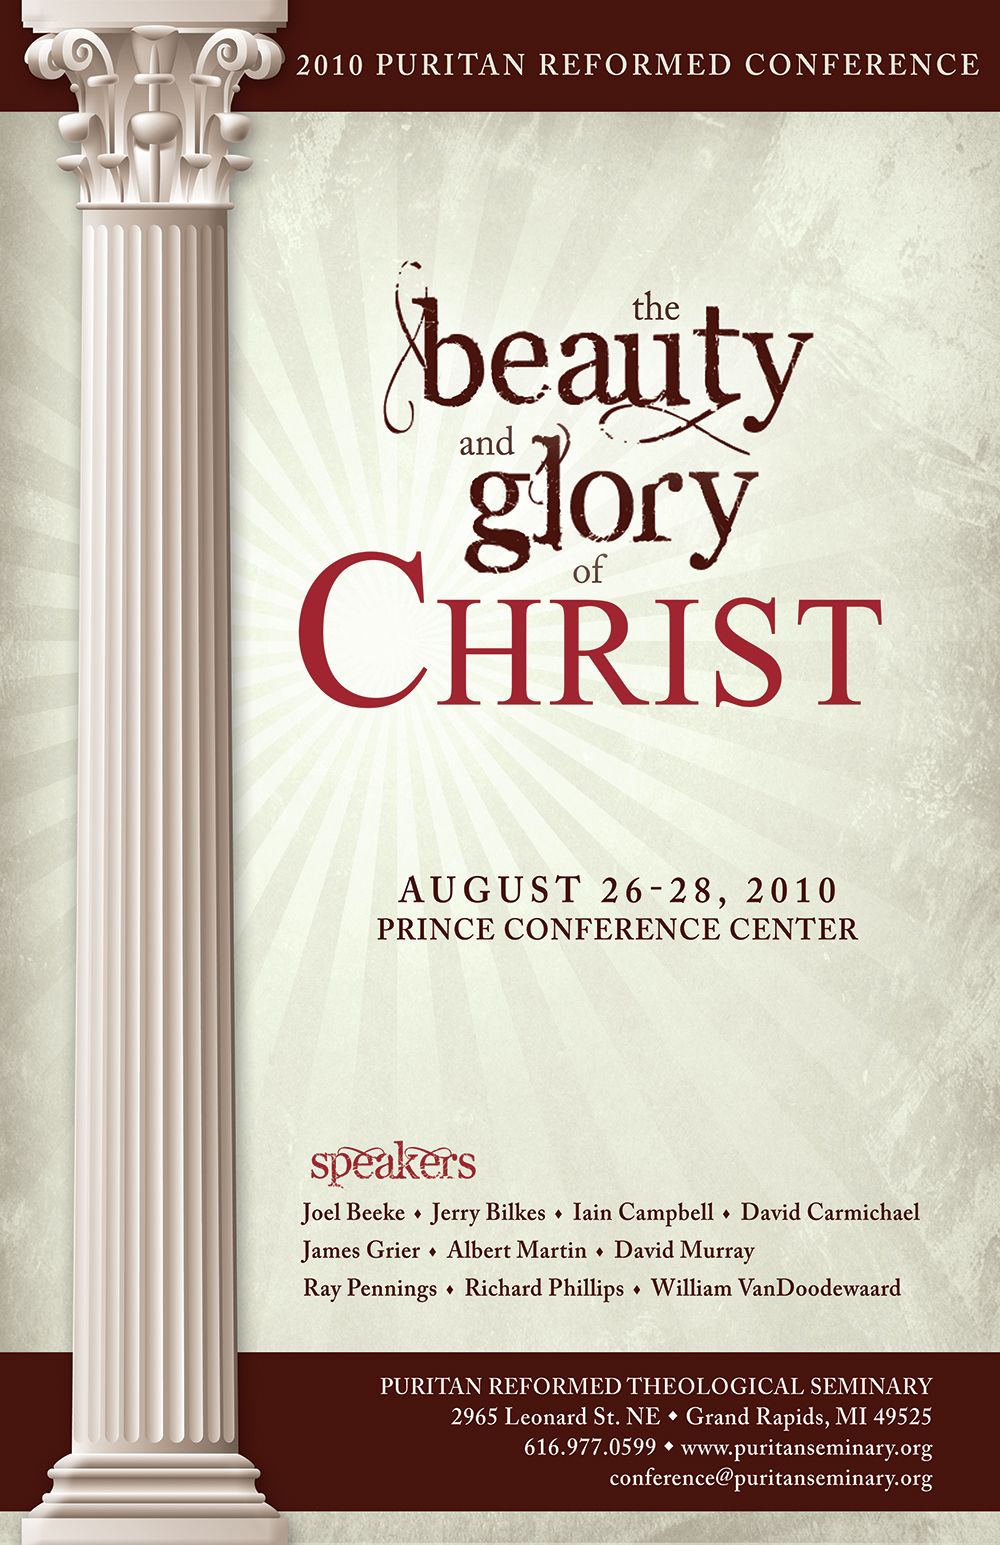 The Beauty and Glory of the Christ